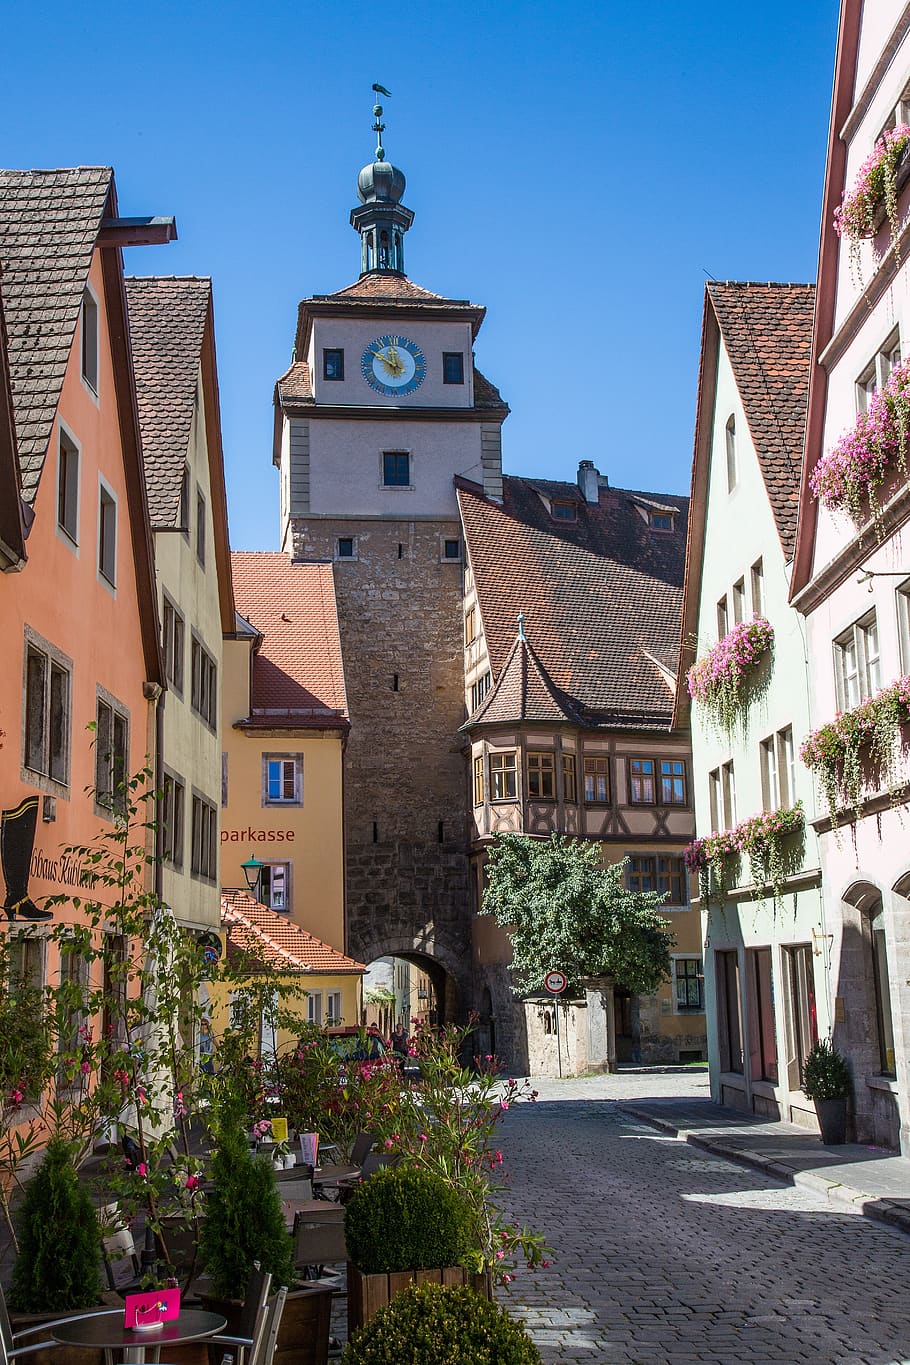 rothenburg of the deaf, rothenburg, historic center, gate tower, george alley, building exterior, architecture, built structure, building, city